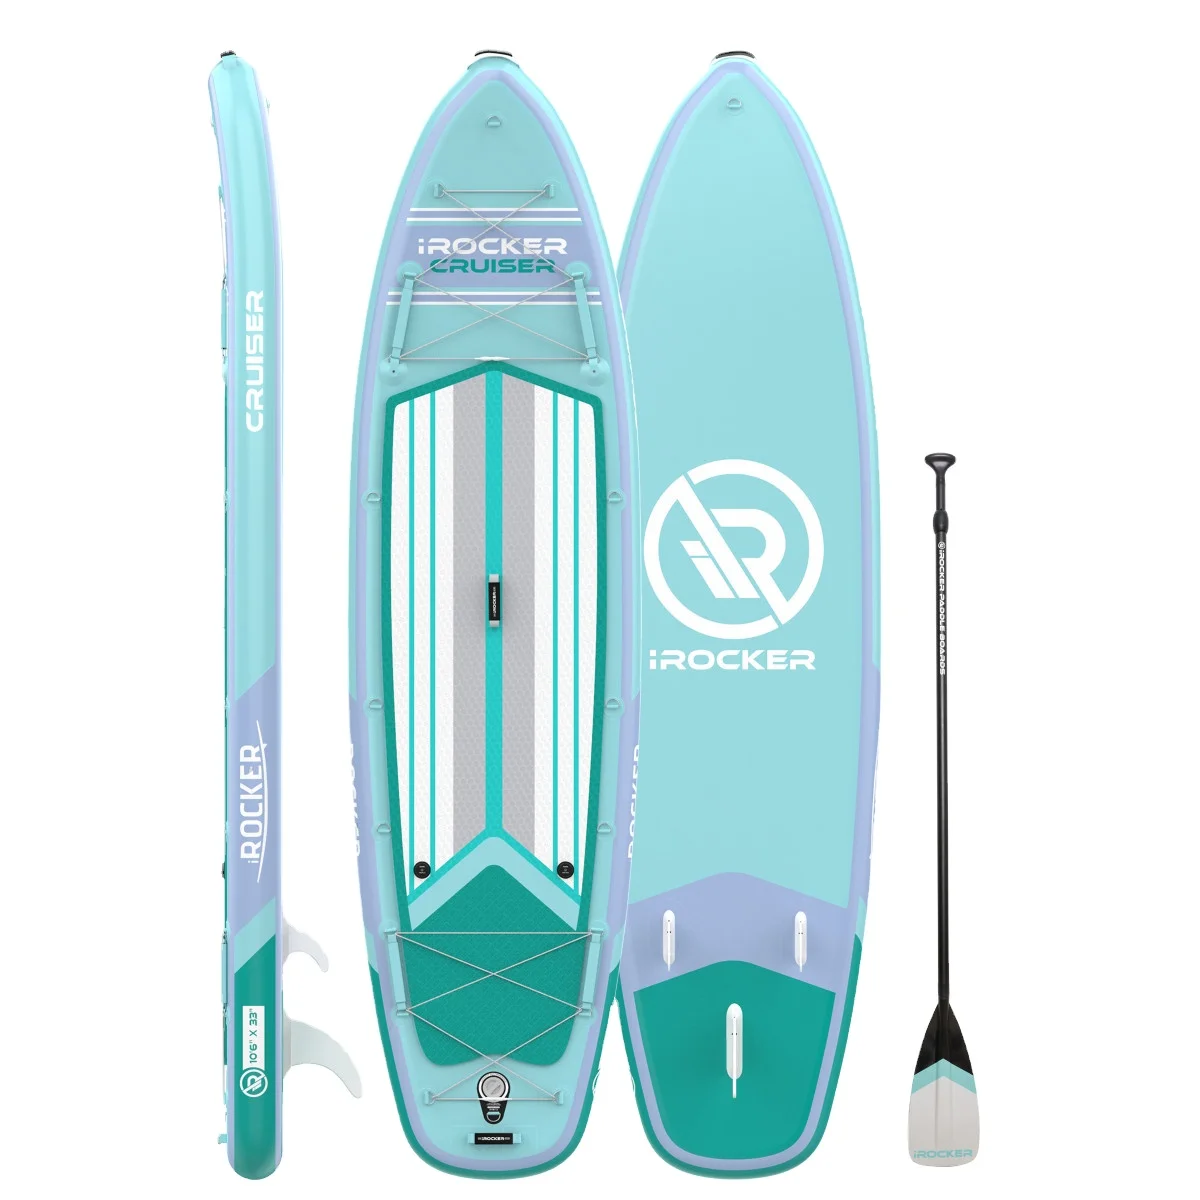 

2022 10.6 10.0 11.0 ft Best Quality Inflatable Surfboards Sup Paddle Board Surfing Stand Up Paddle Boards, As picture or customized